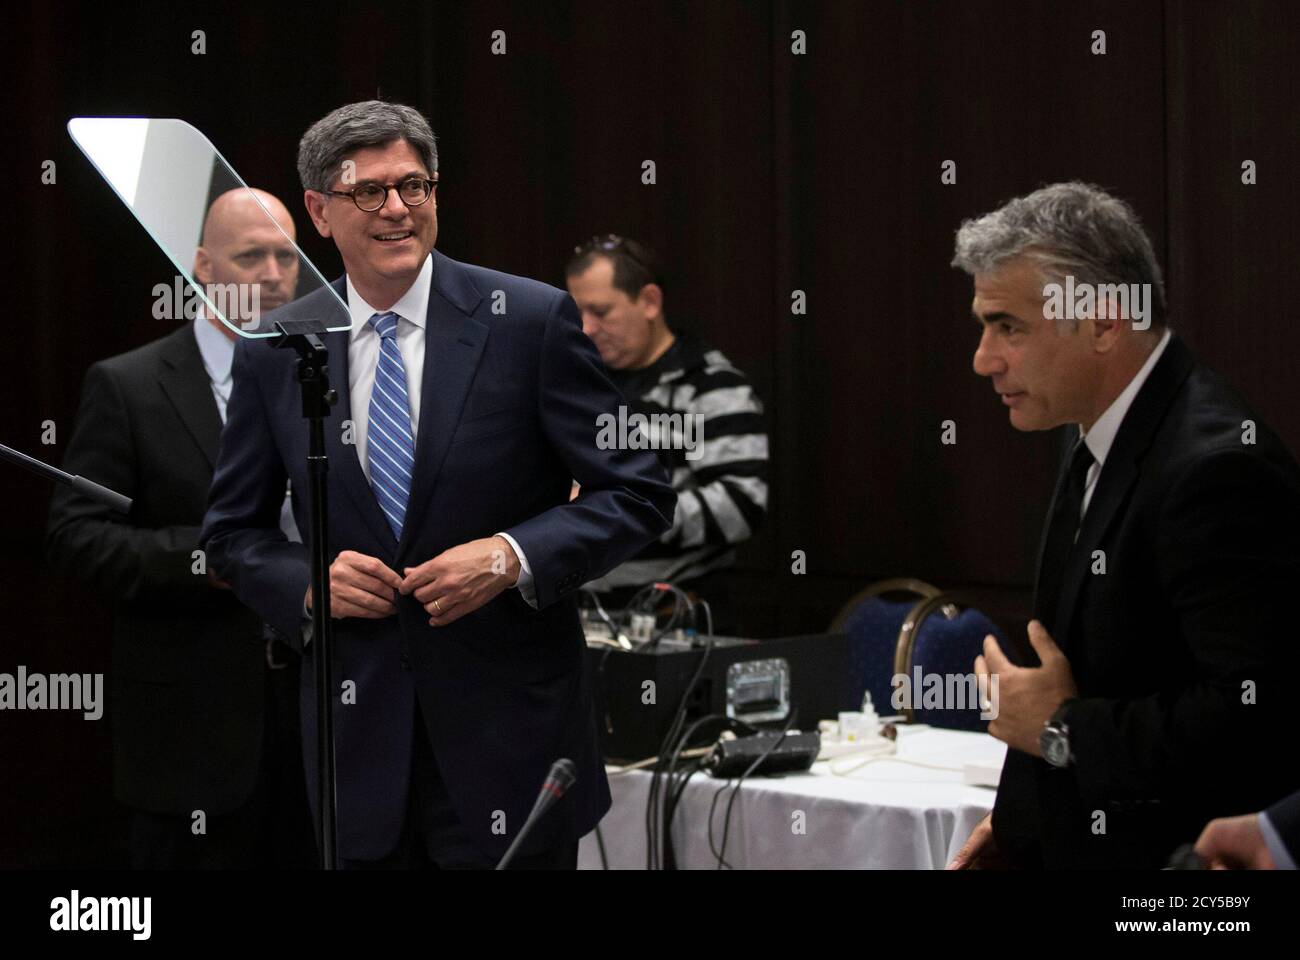 U.S. Treasury Secretary Jack Lew buttons his jacket near Israel's Finance Minister Yair Lapid (R) after Lew's speech to the U.S.-Israel Joint Economic Development Group in Jerusalem June 18, 2014. Lew said Iran's economy remained in a state of distress due to sanctions over its nuclear program and that the United States would not rush into making a bad deal to prevent Iran from obtaining a nuclear weapon. REUTERS/Baz Ratner (JERUSALEM - Tags: POLITICS BUSINESS ENERGY) Stock Photo